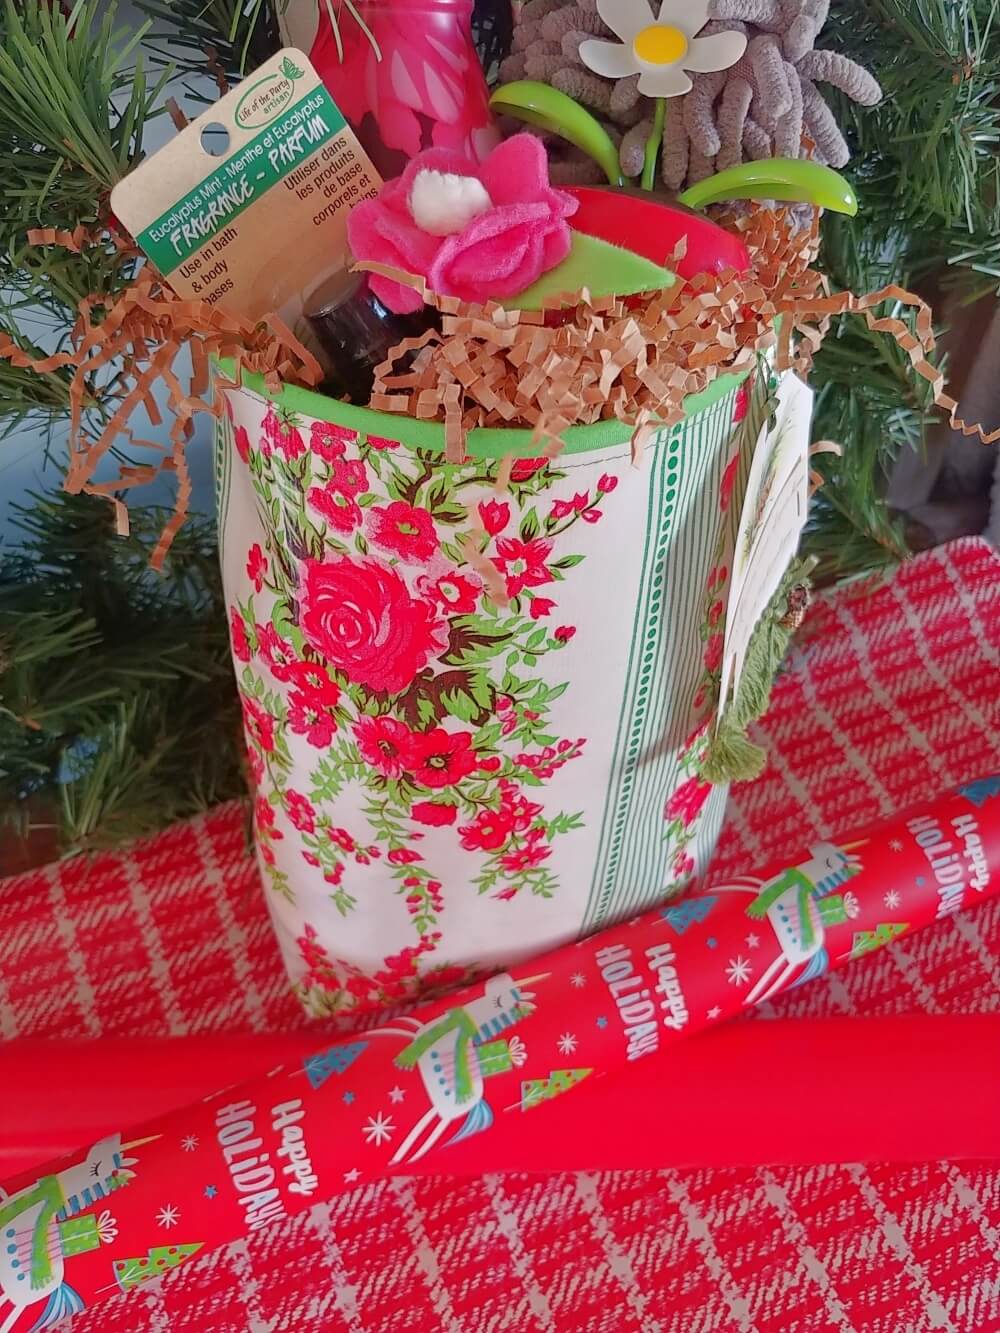 Festive Holiday Ideas - Homemade Gifts!